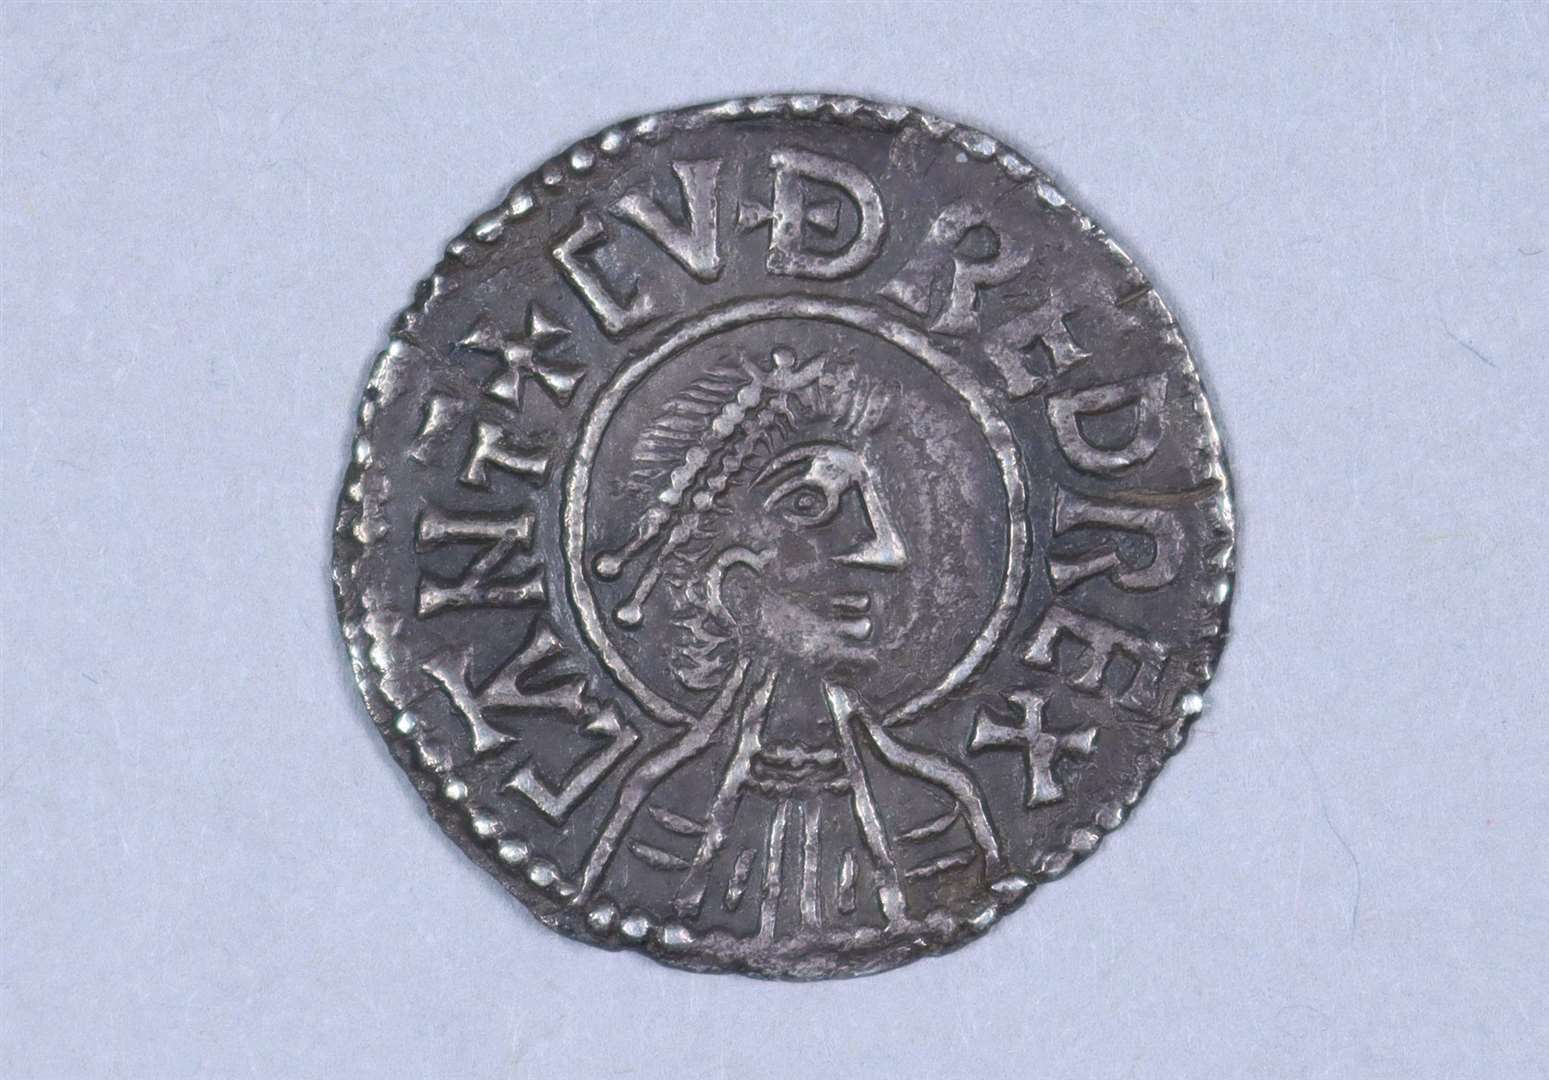 Cuthred, King of Kent, is recalled by a portrait silver penny dated from 798-807